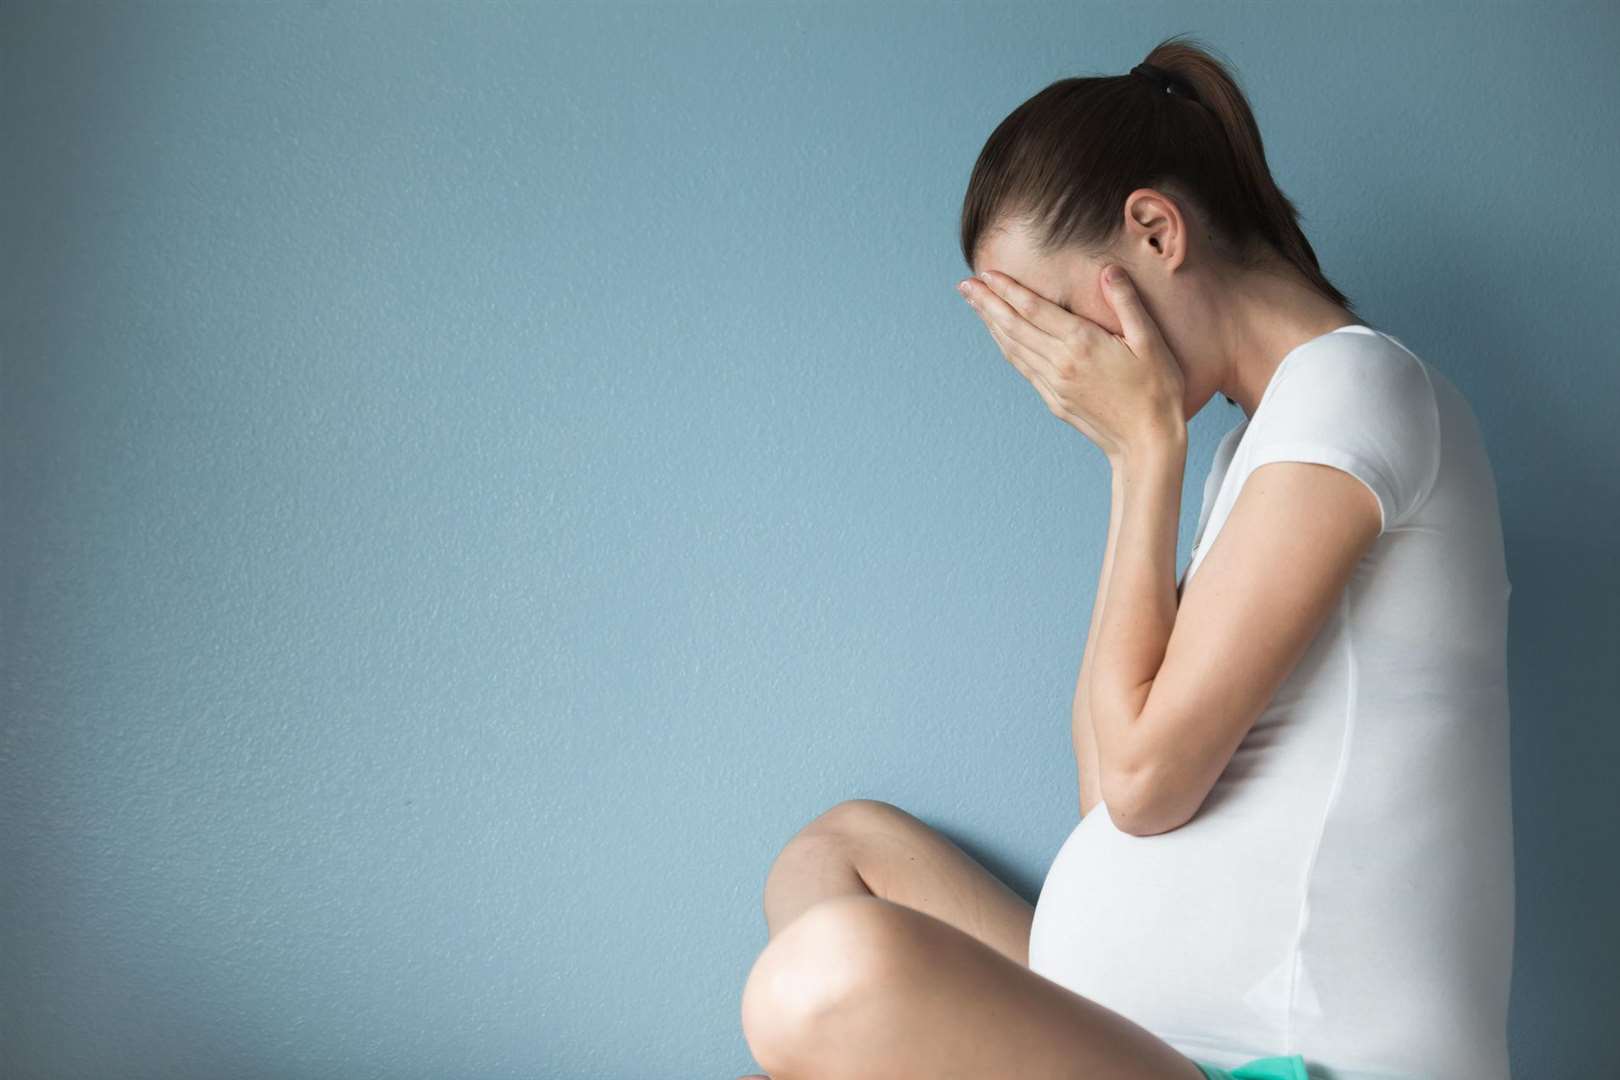 More than one in 10 women in the UK develop a mental illness during pregnancy